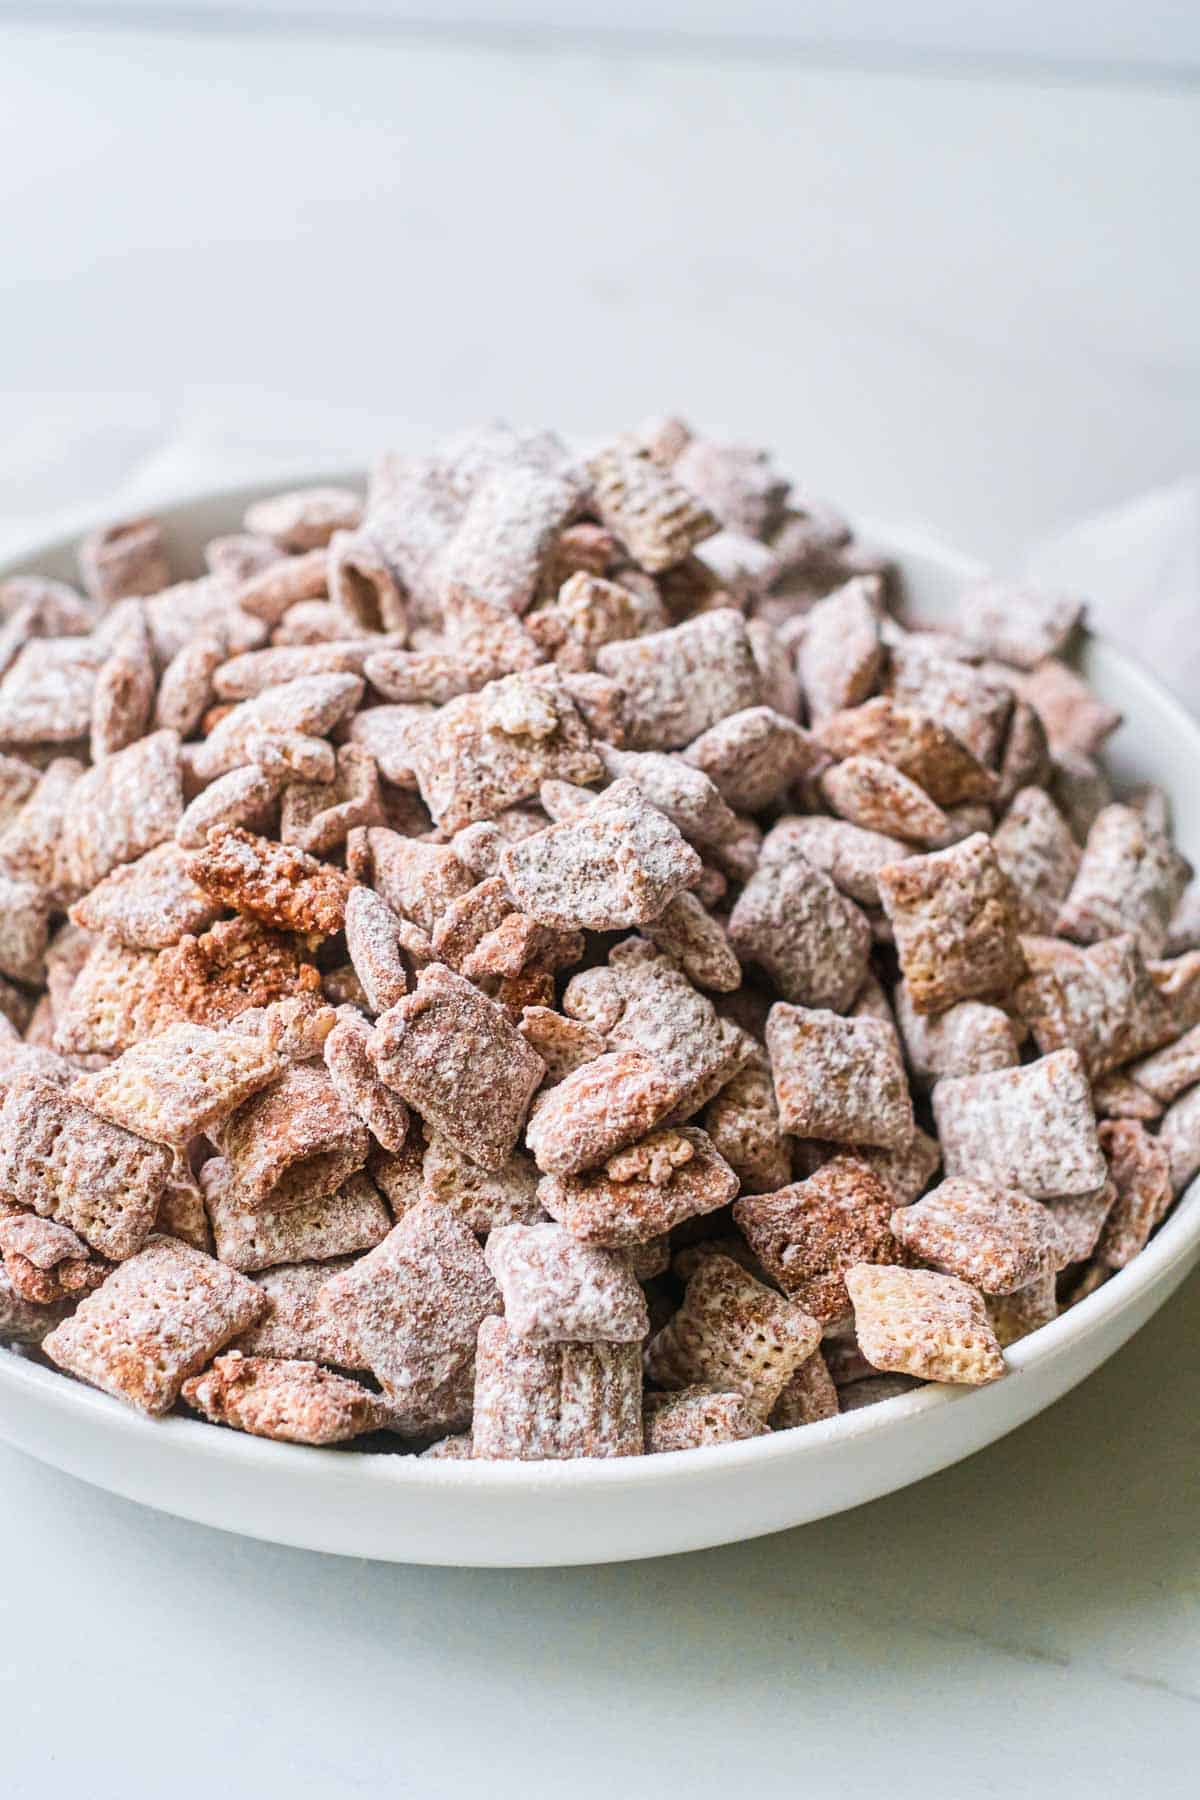 the completed puppy chow recipe